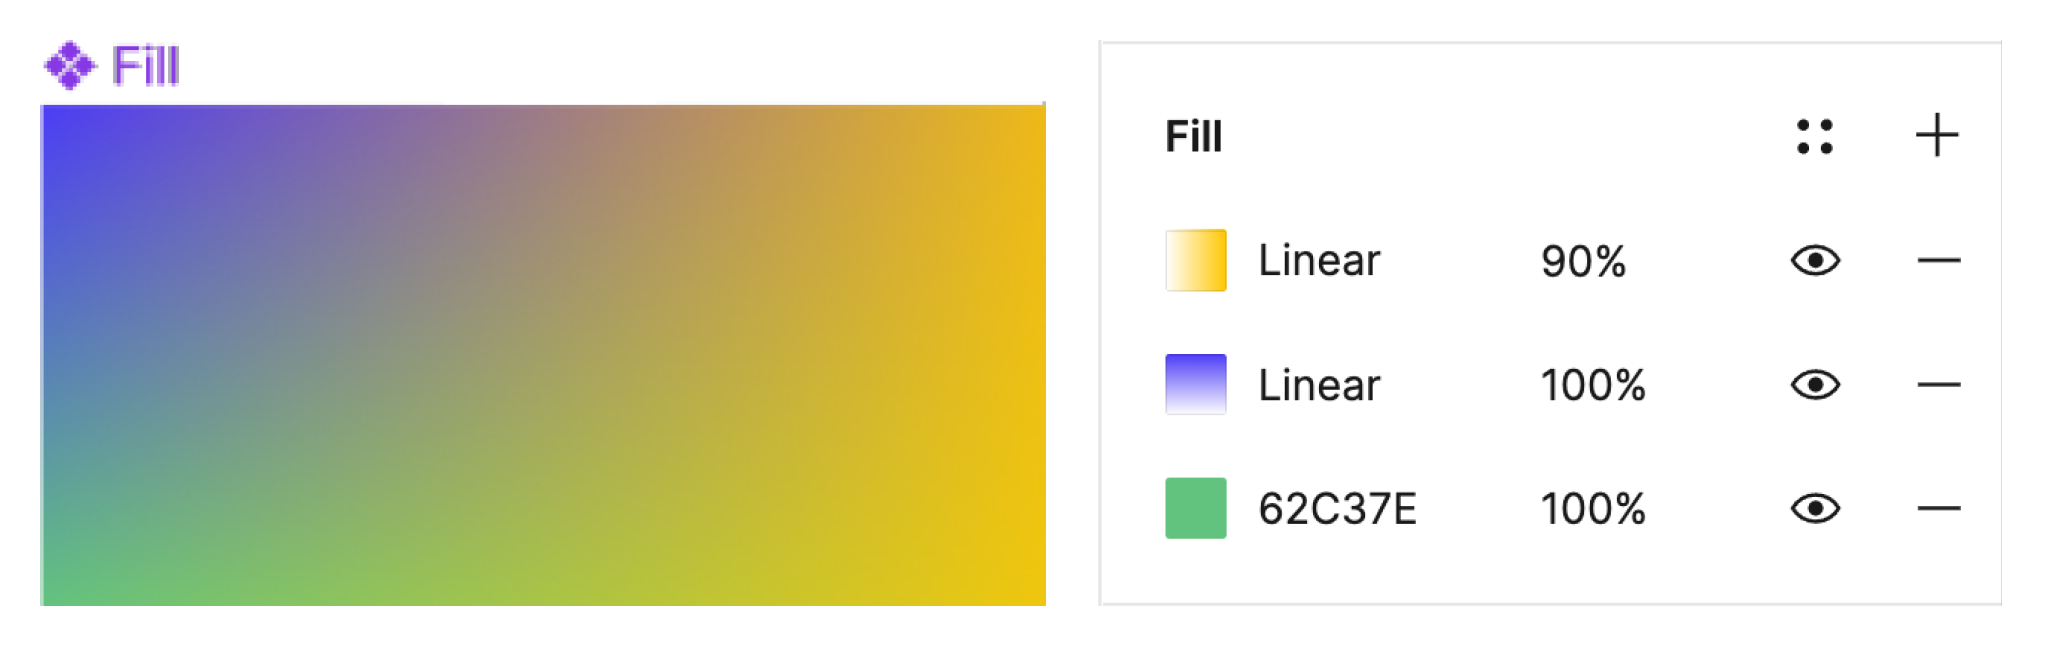 Multiple fills and linear gradients in Figma